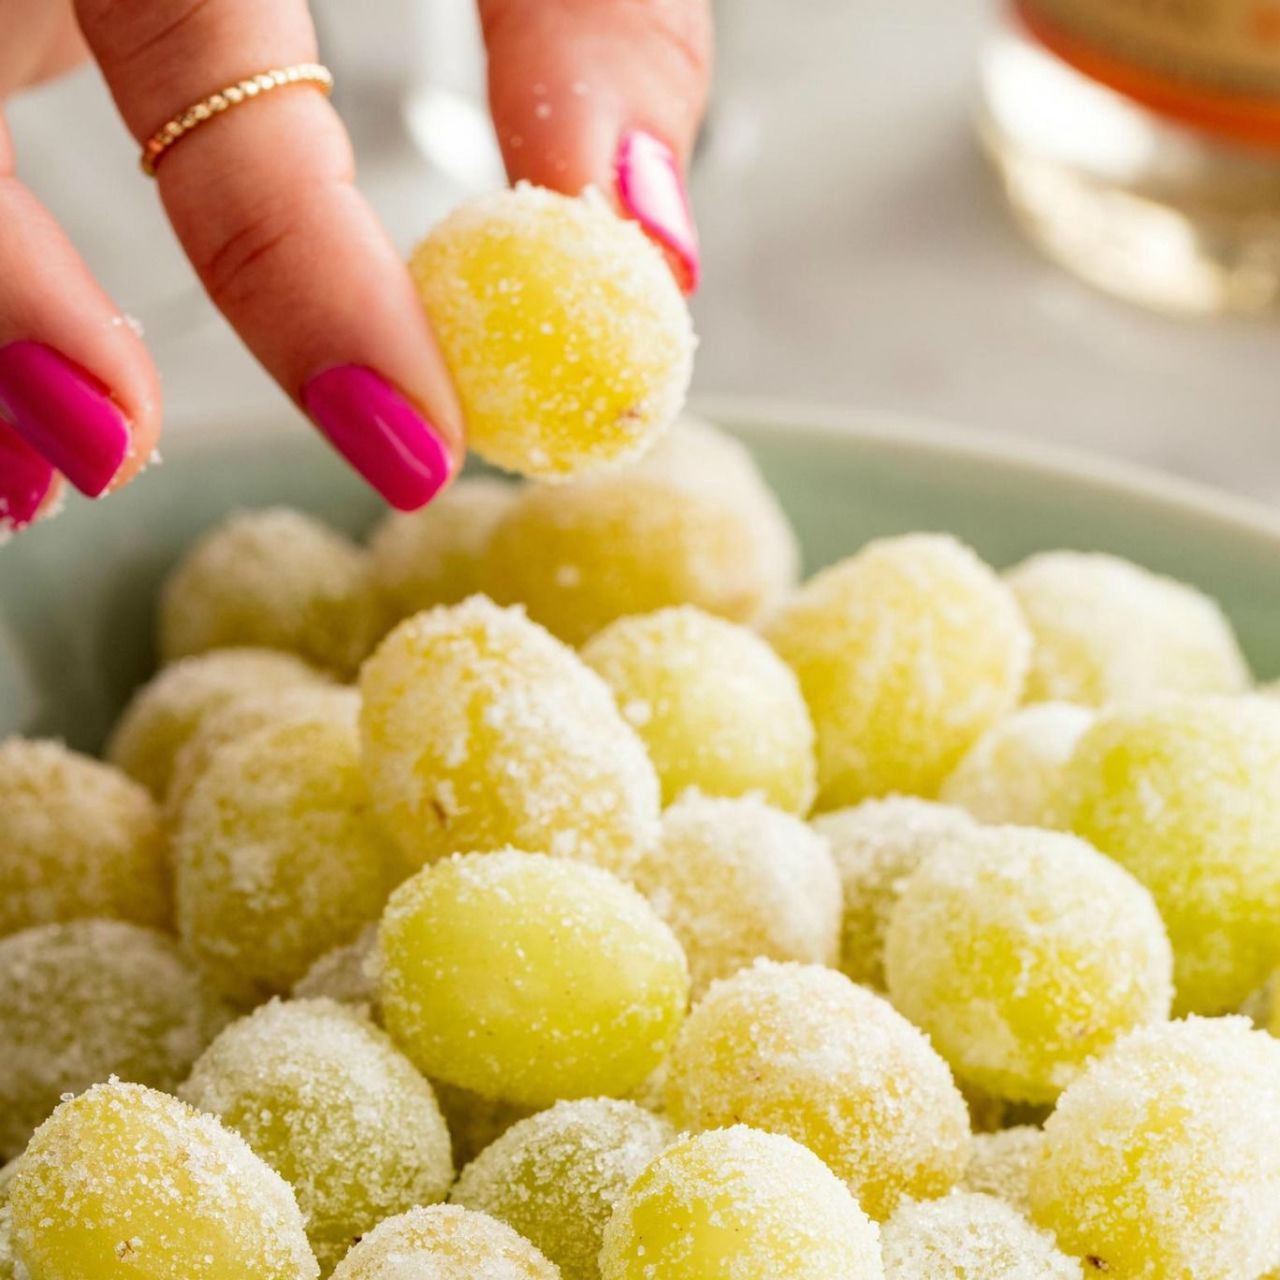 Prosecco Grapes Will Get You SO Boozy On NYE